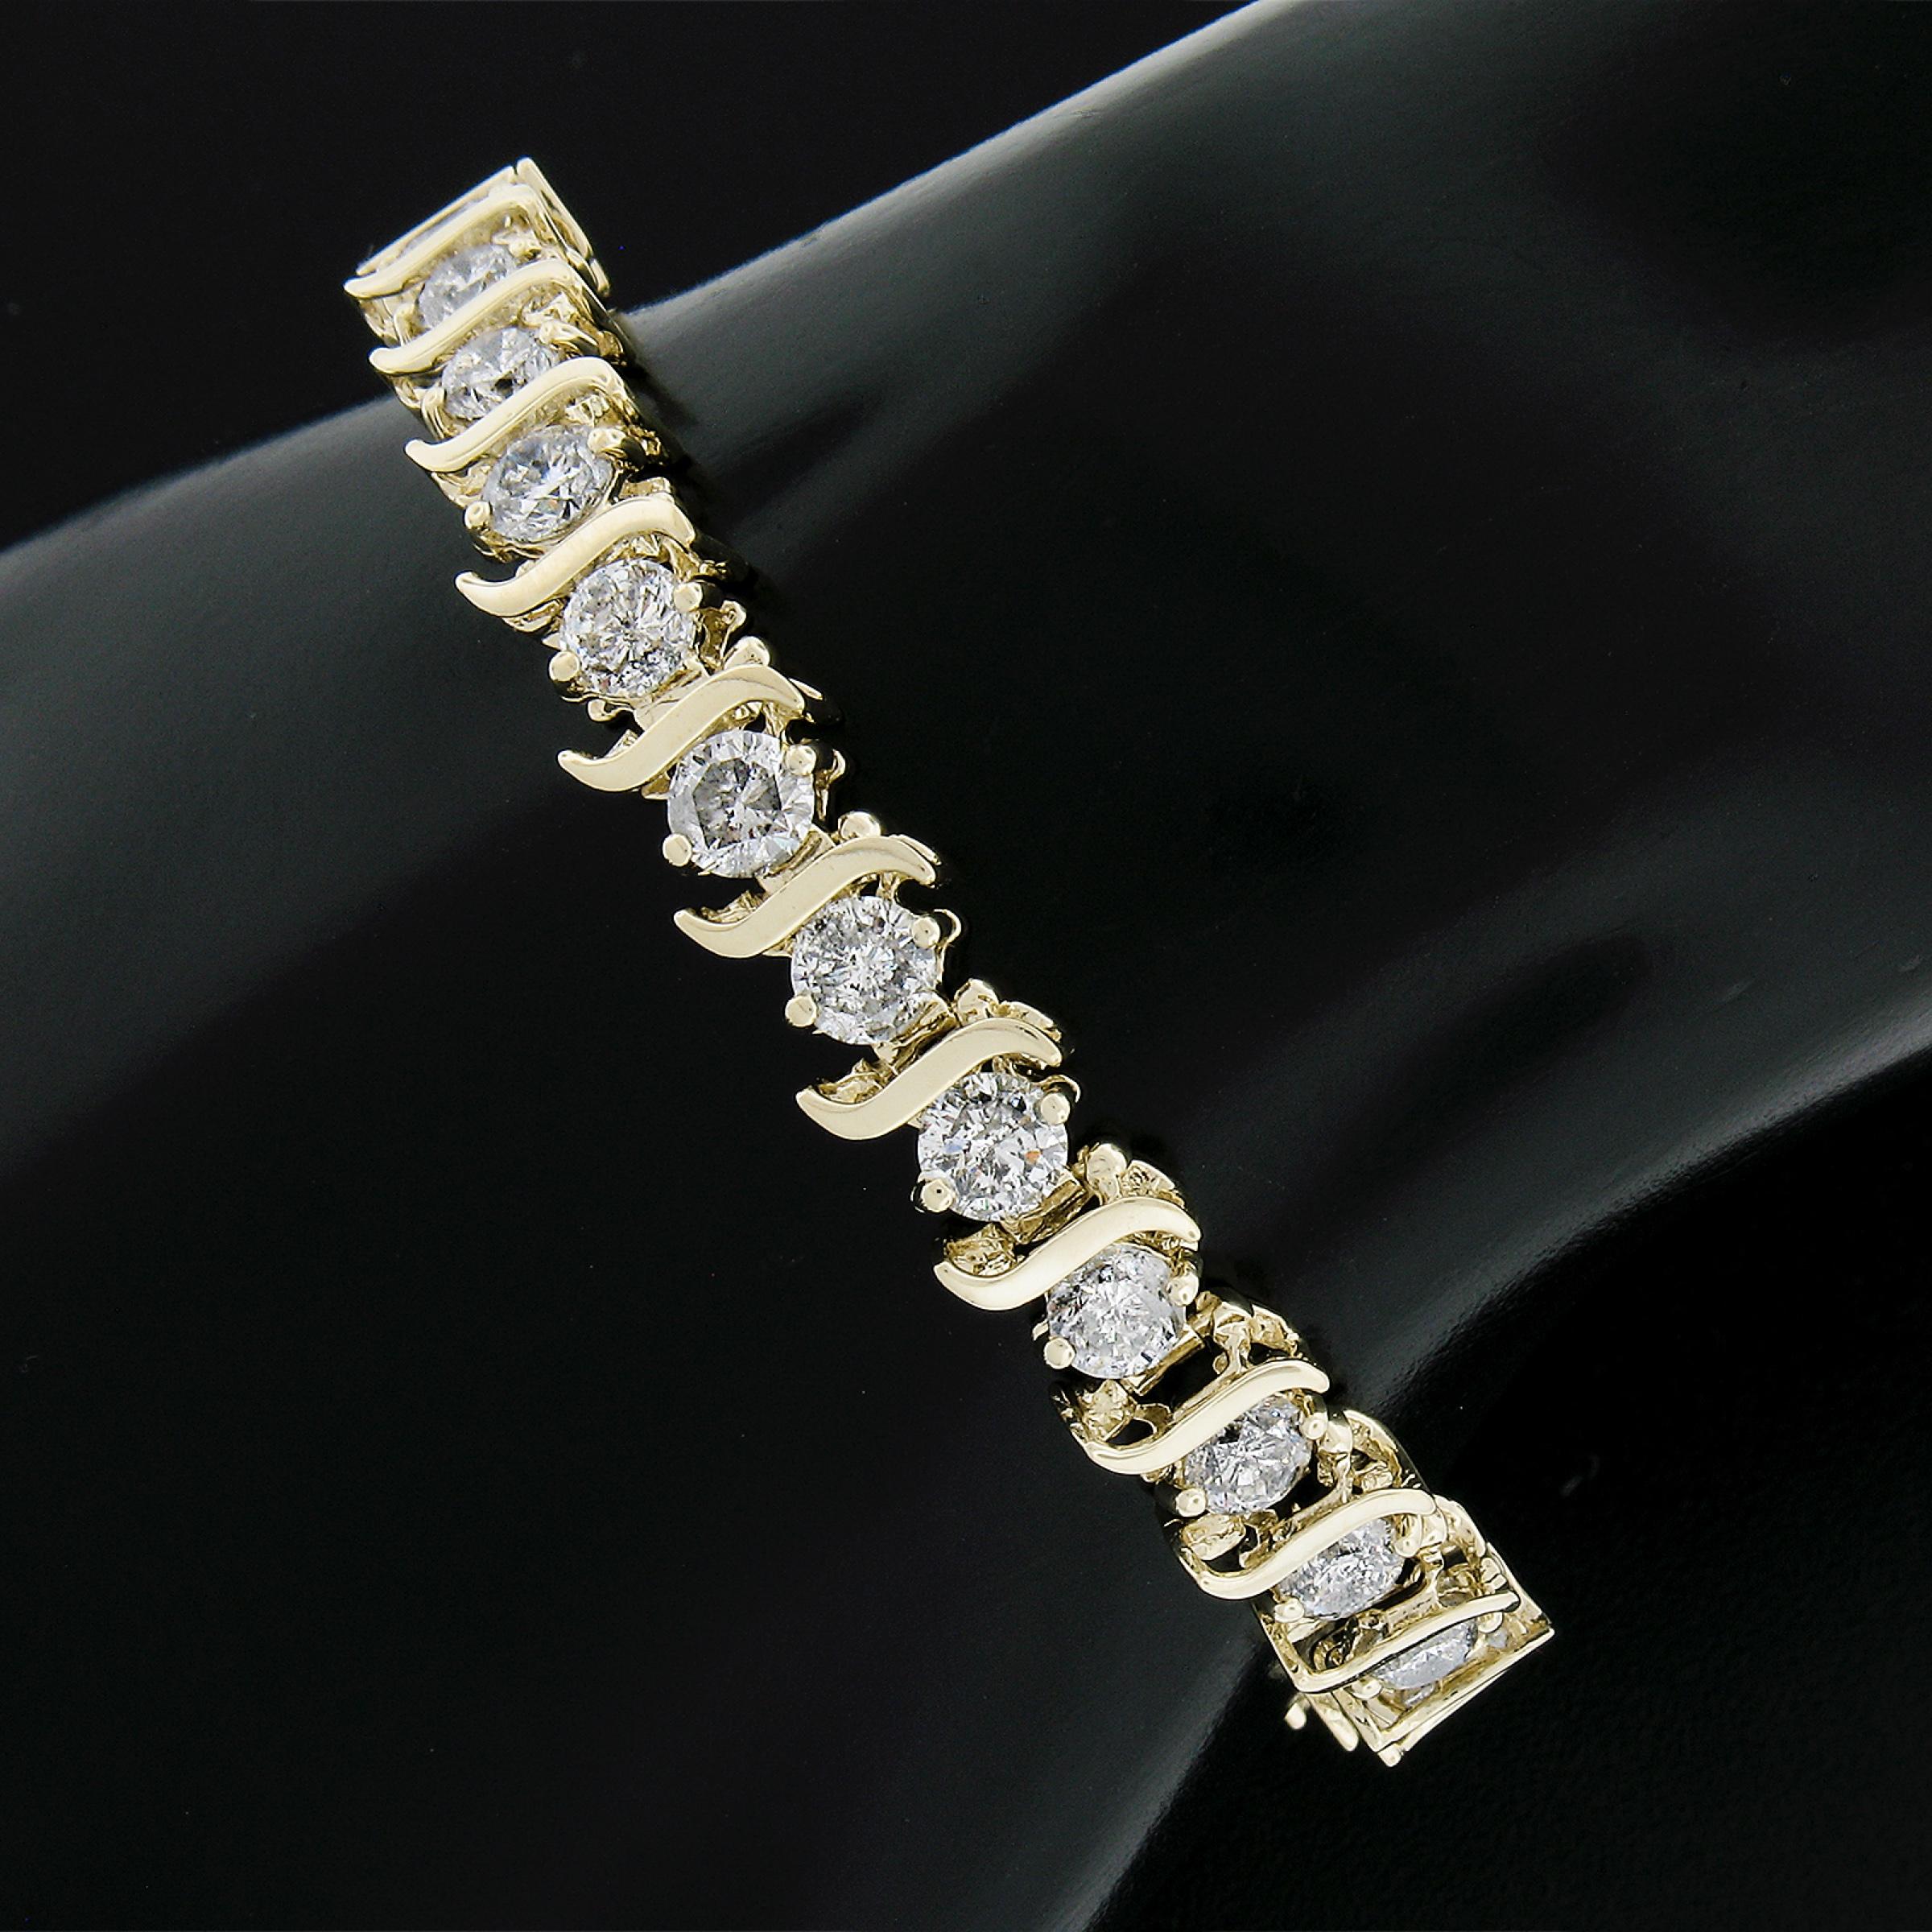 --Stone(s):--
(28) Natural Genuine Diamonds - Round Brilliant Cut - Prong Set - G/H Color - I1/I2 Clarity 
Total Carat Weight:	8.80 (approx.)

Material: Solid 14K Yellow Gold
Weight: 19.95 Grams
Length: Will comfortably fit up to a 7 inch wrist